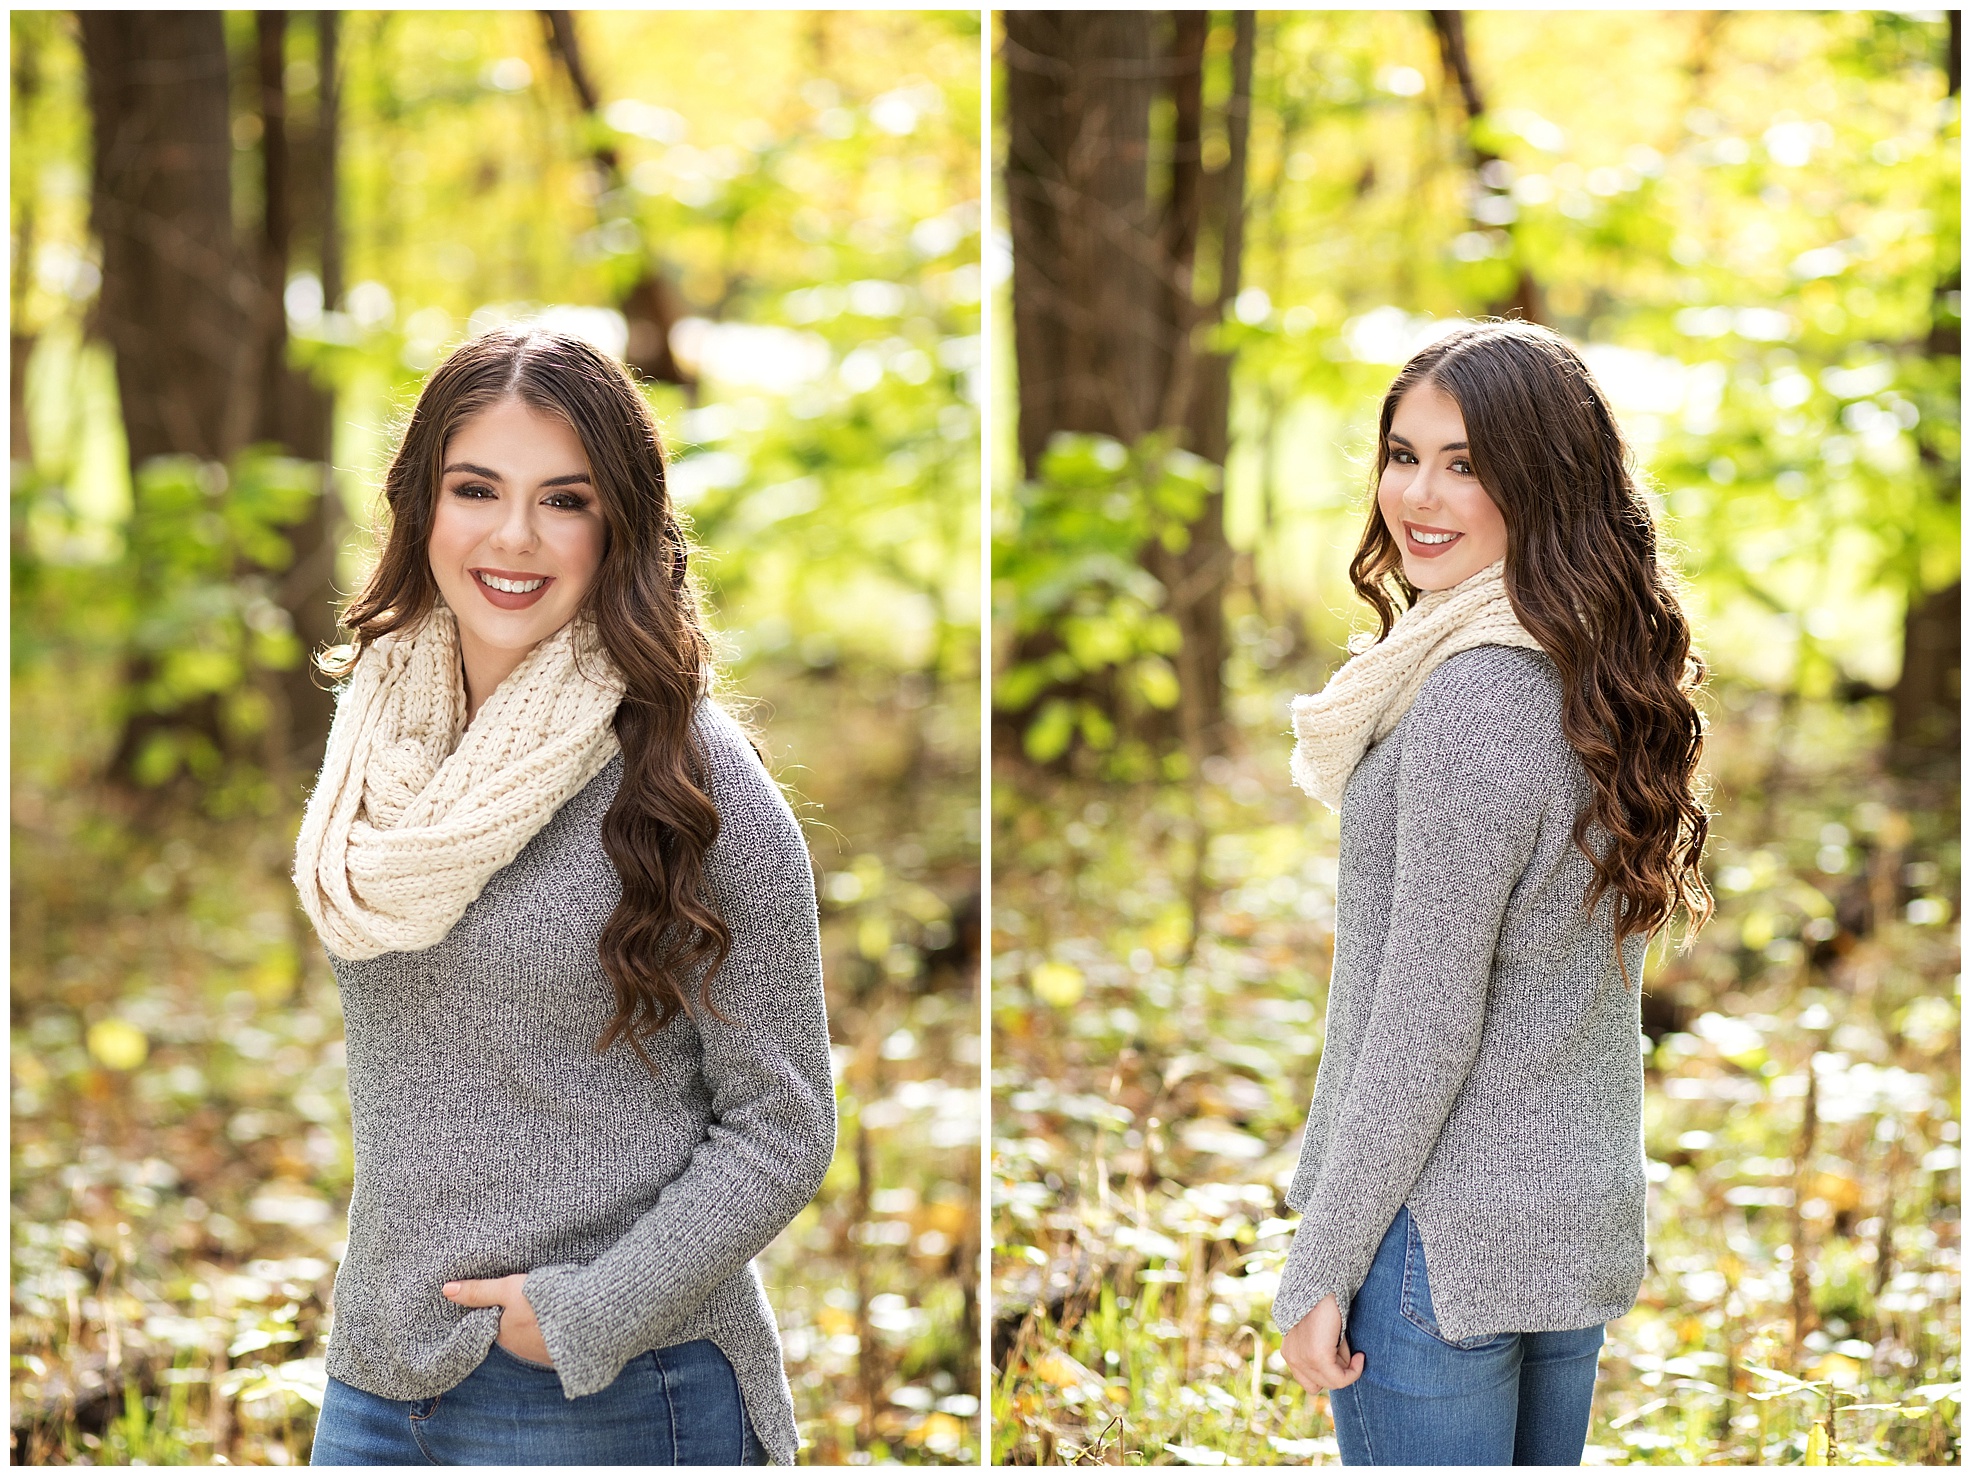 Emily | Peoria IL teen portrait session | Fall | Shelby Photography